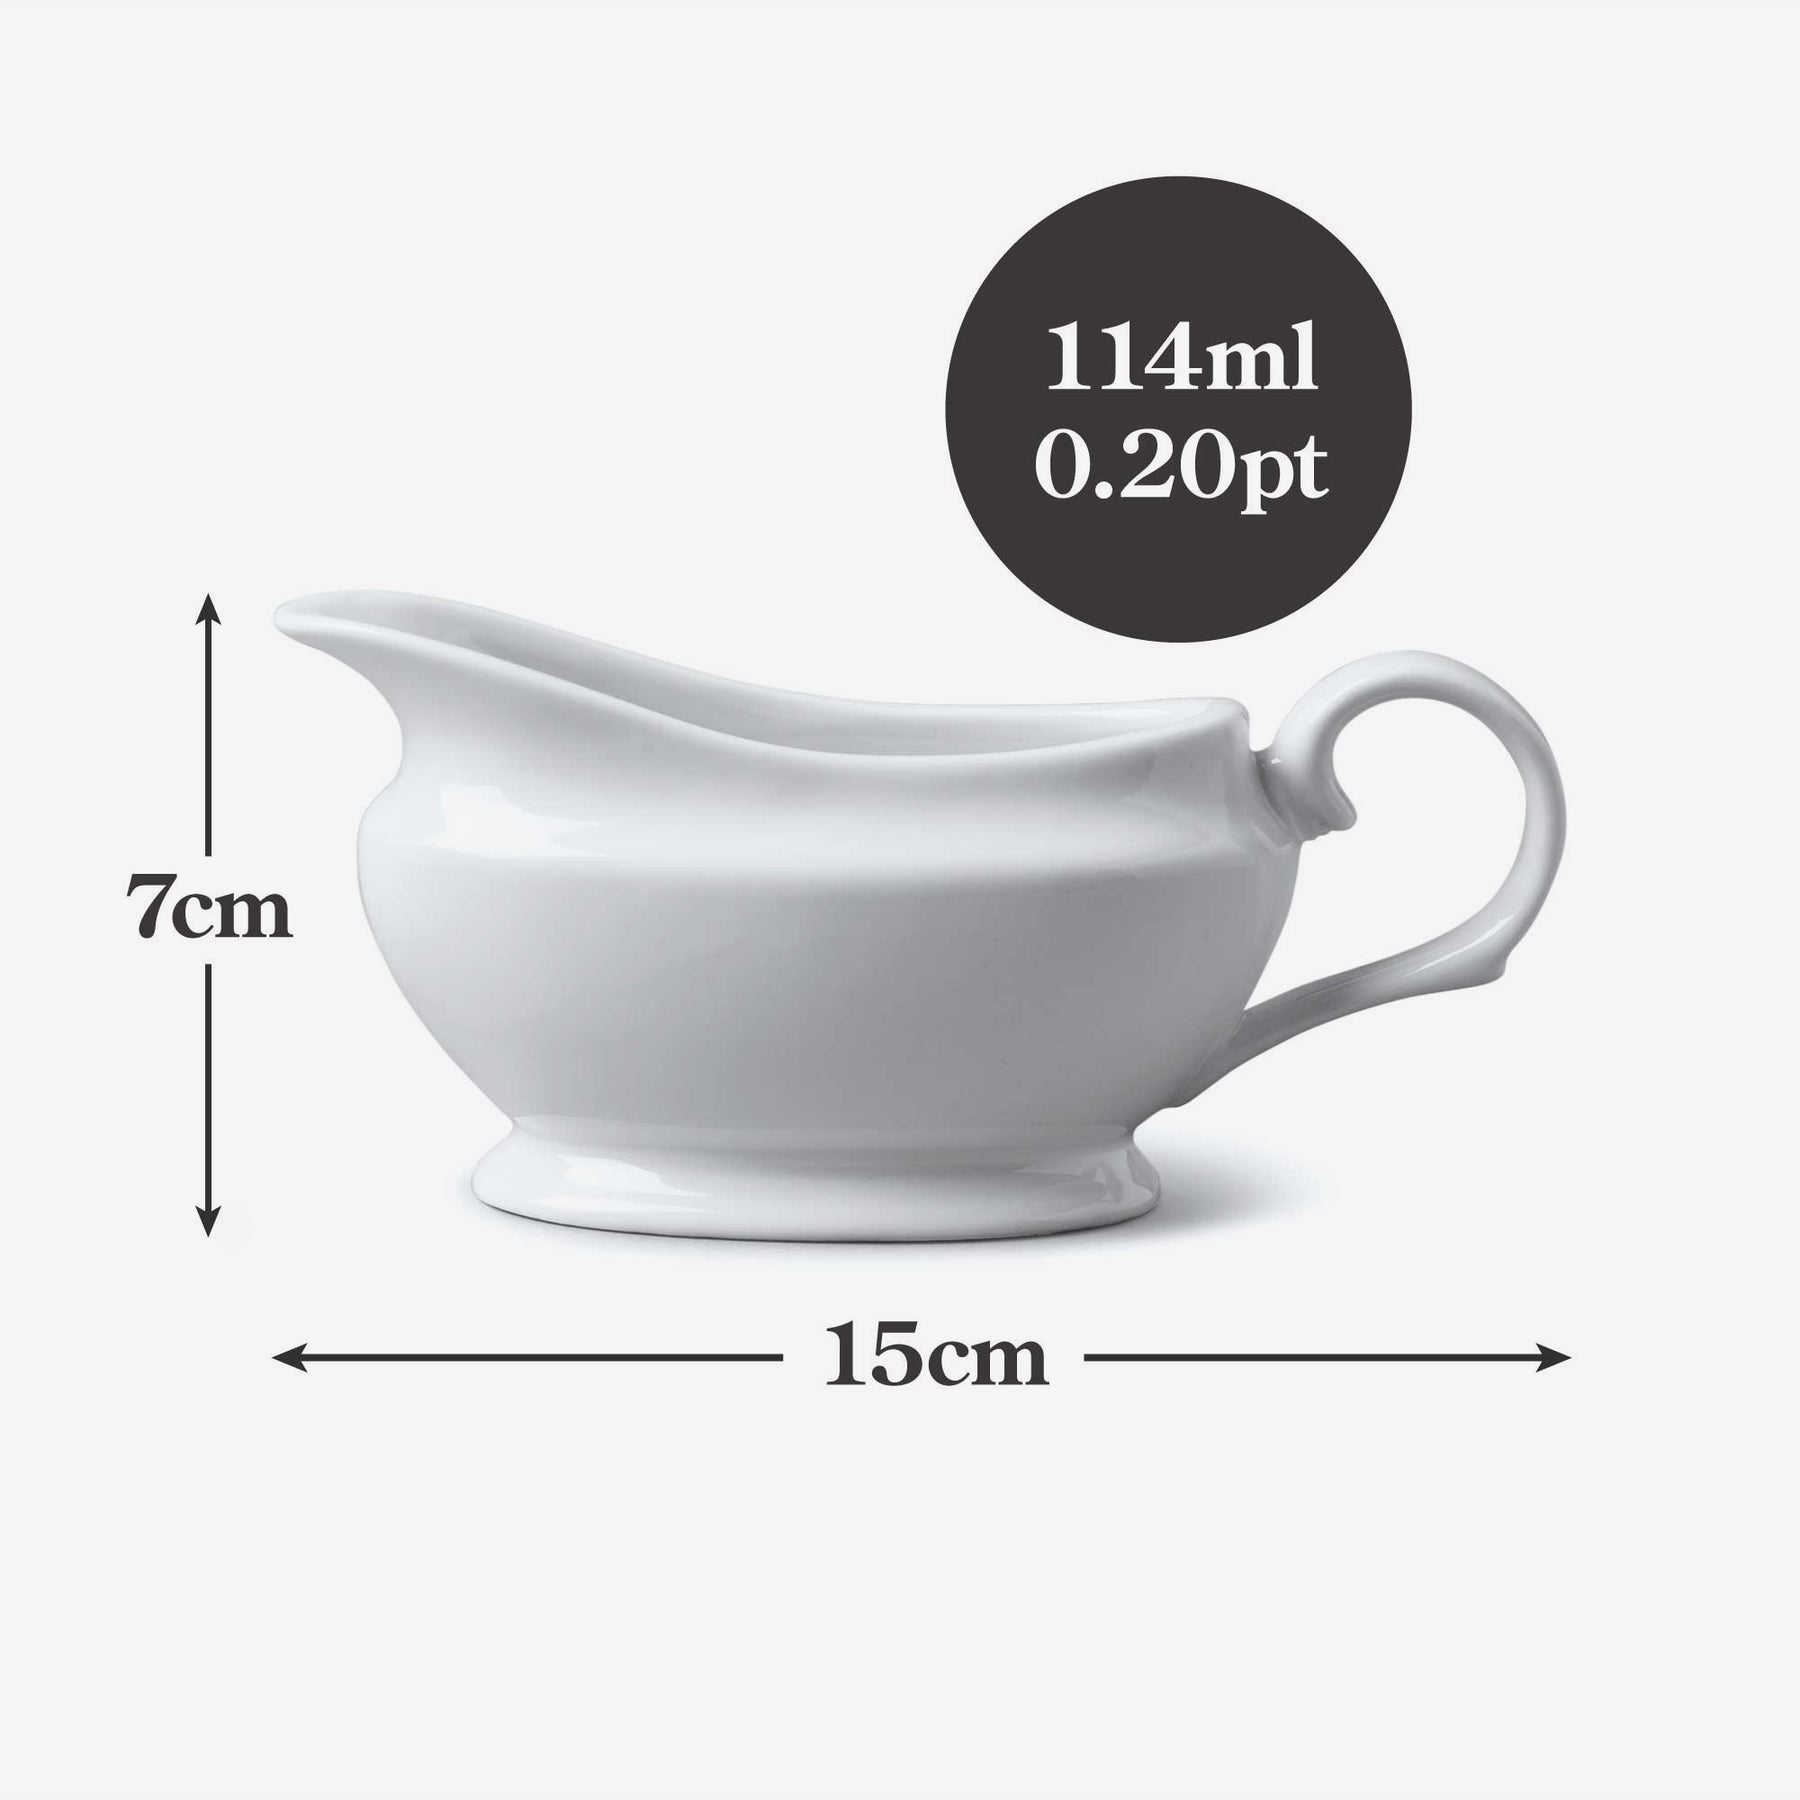 Porcelain Gravy & Sauce Boat, Available in 3 Sizes